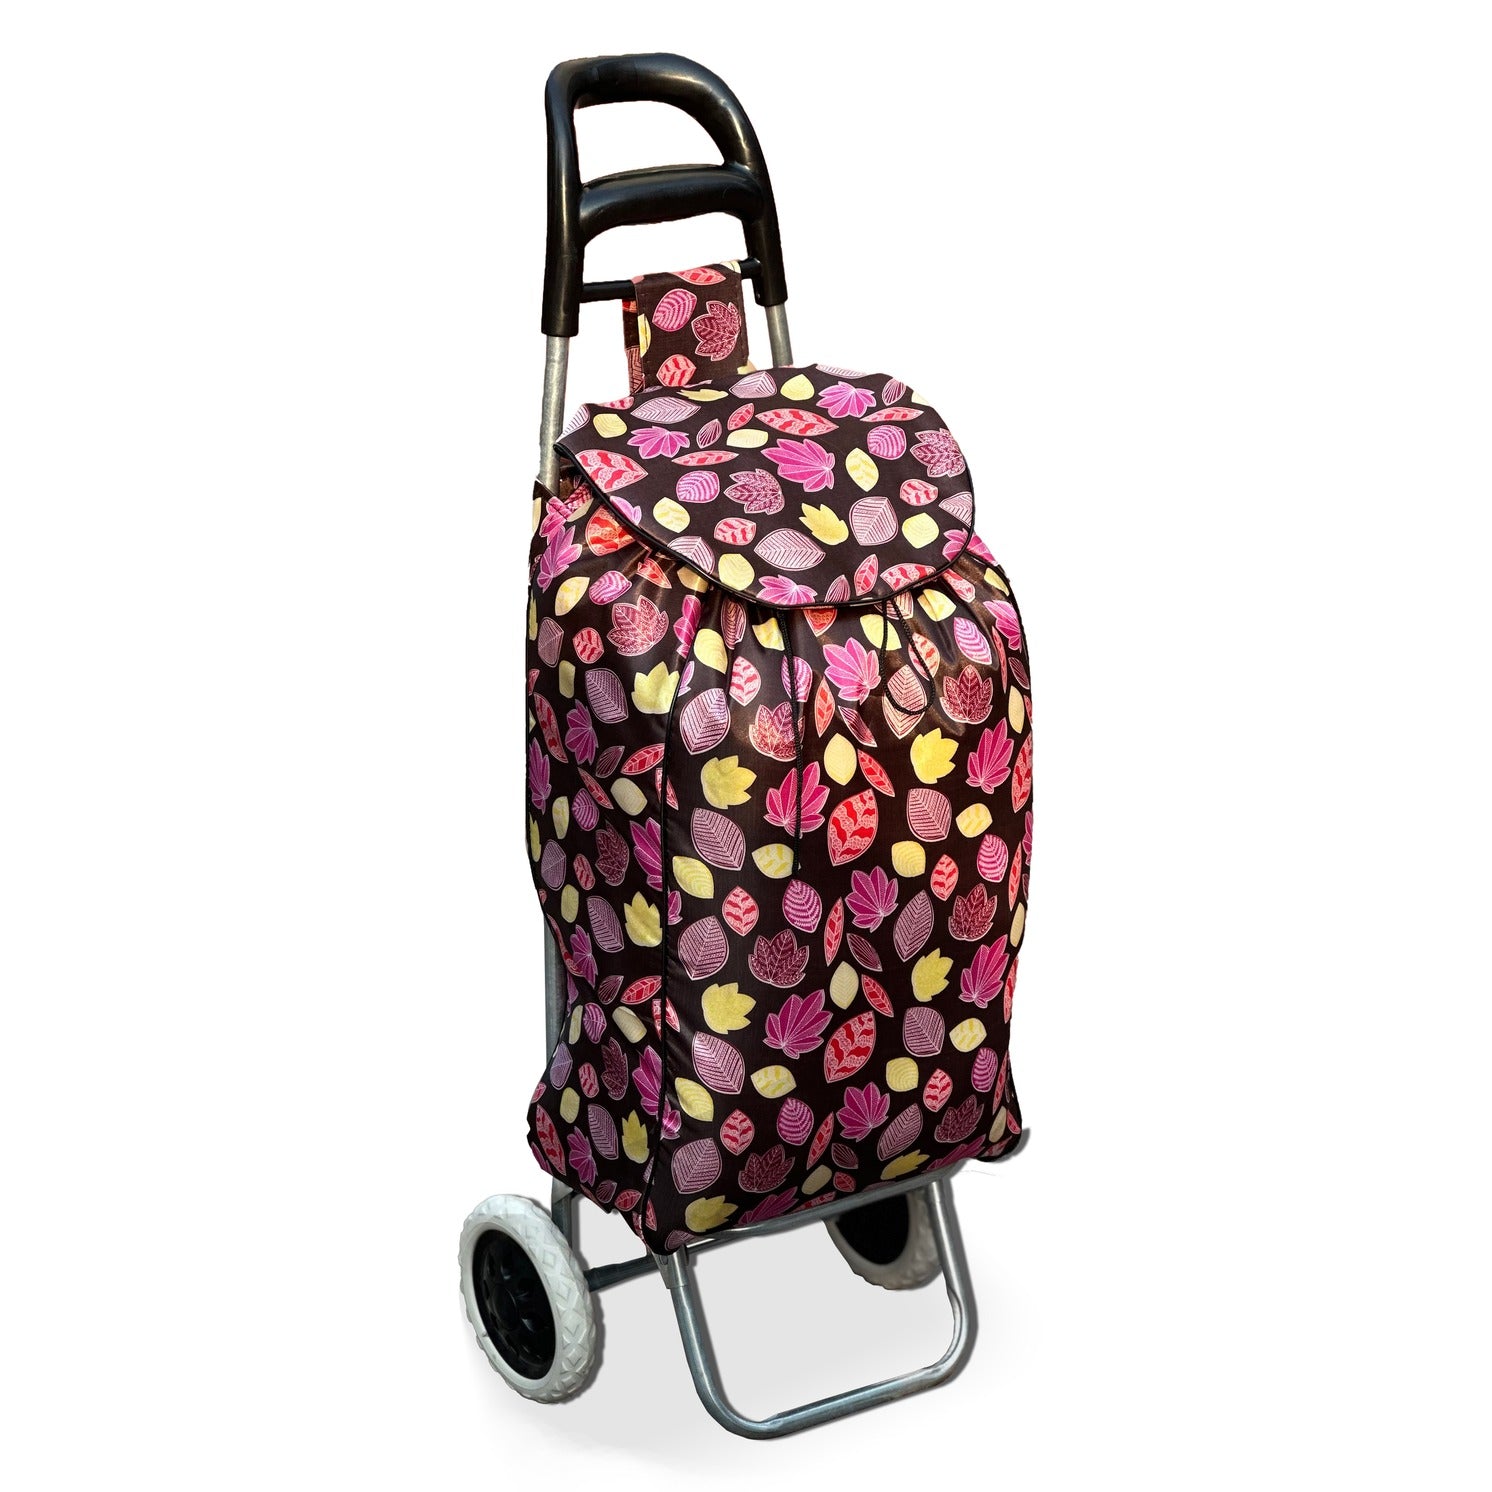 Printed Foldable Grocery Shopping Trolley Bag with Two Wheels | Portable Rolling Shopping Cart